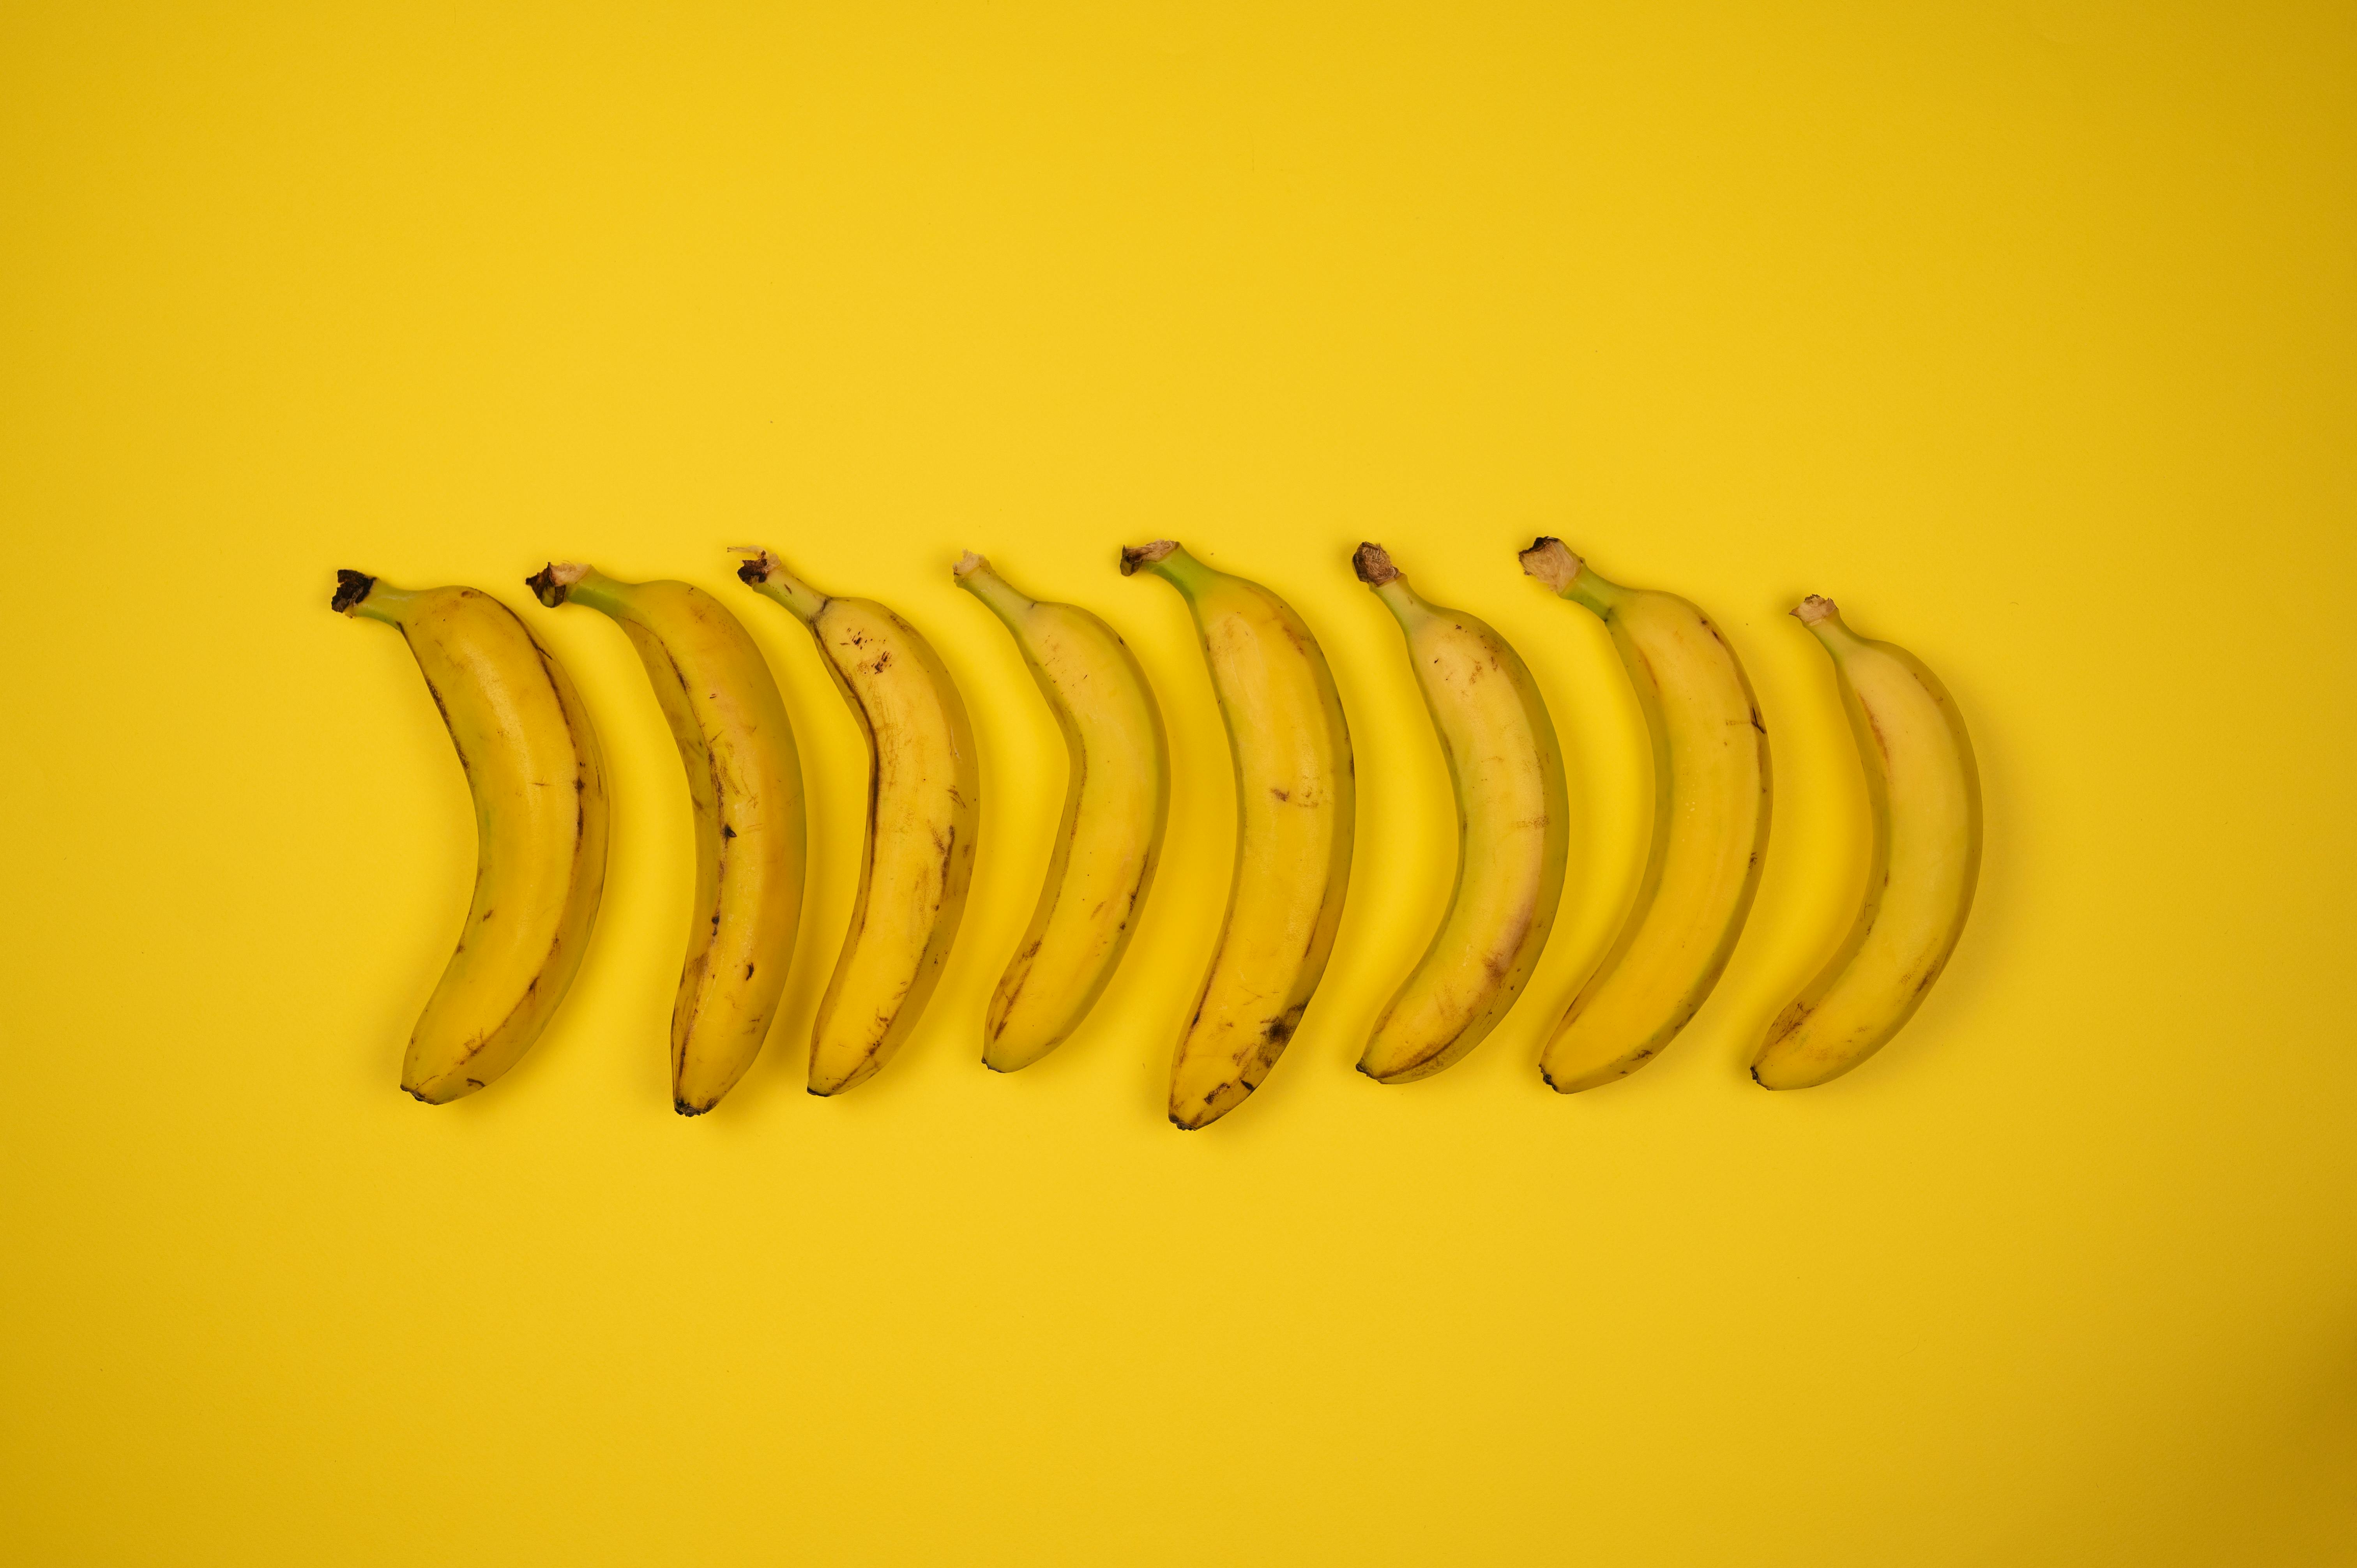 Backdrop of whole fresh bananas with stems · Free Stock Photo